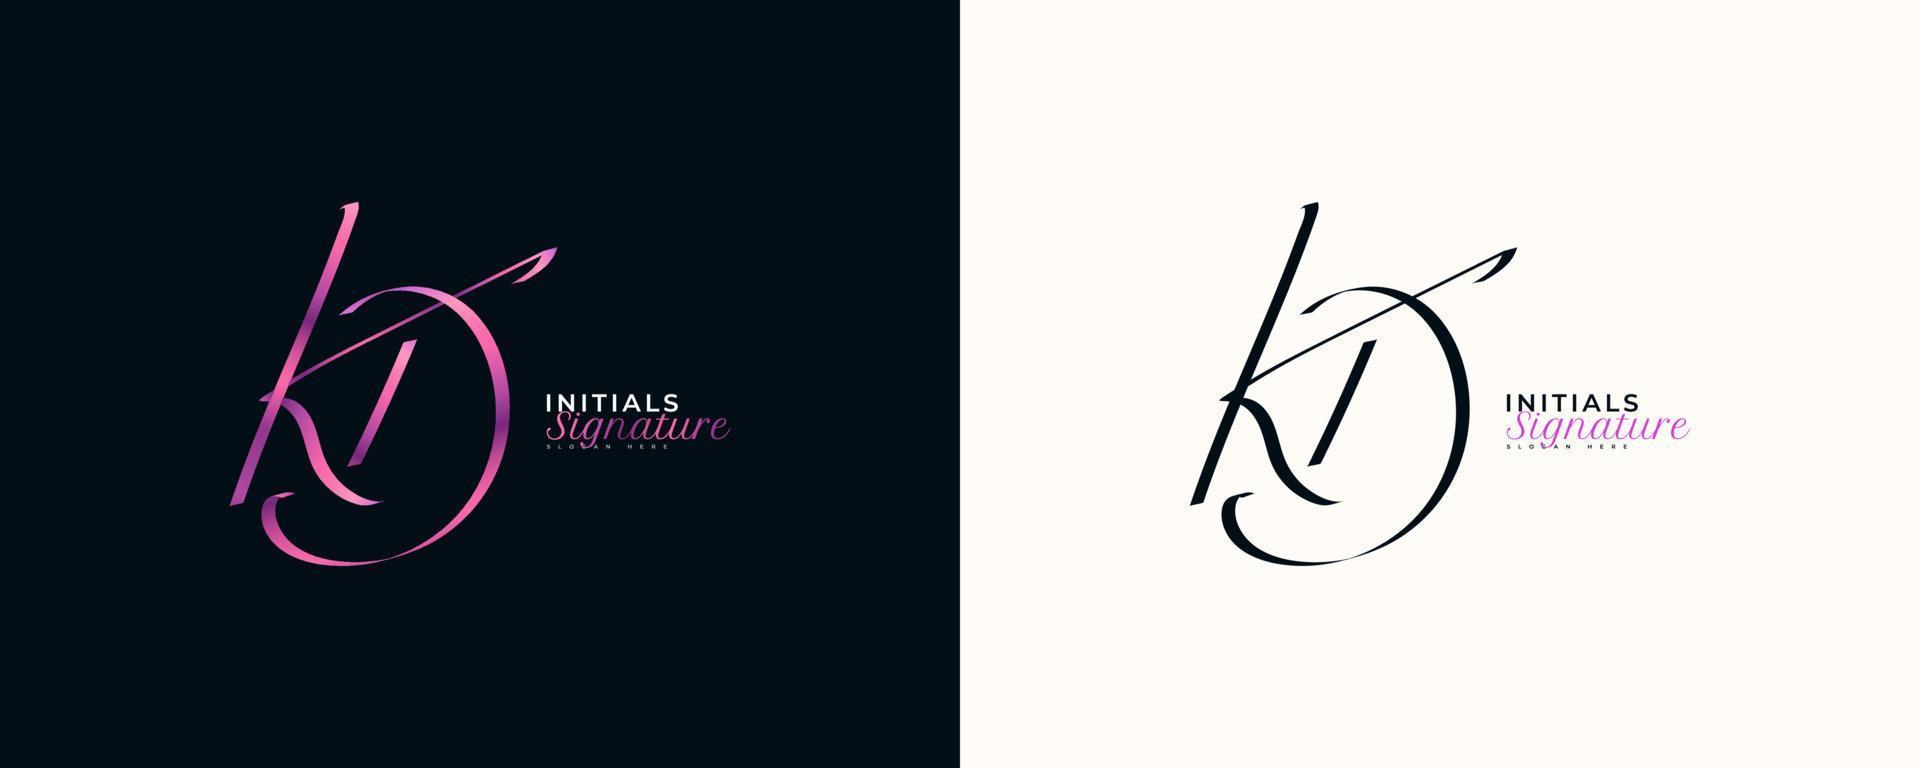 KD Initial Signature Logo Design with Elegant and Minimalist Handwriting Style. Initial K and D Logo Design for Wedding, Fashion, Jewelry, Boutique and Business Brand Identity vector